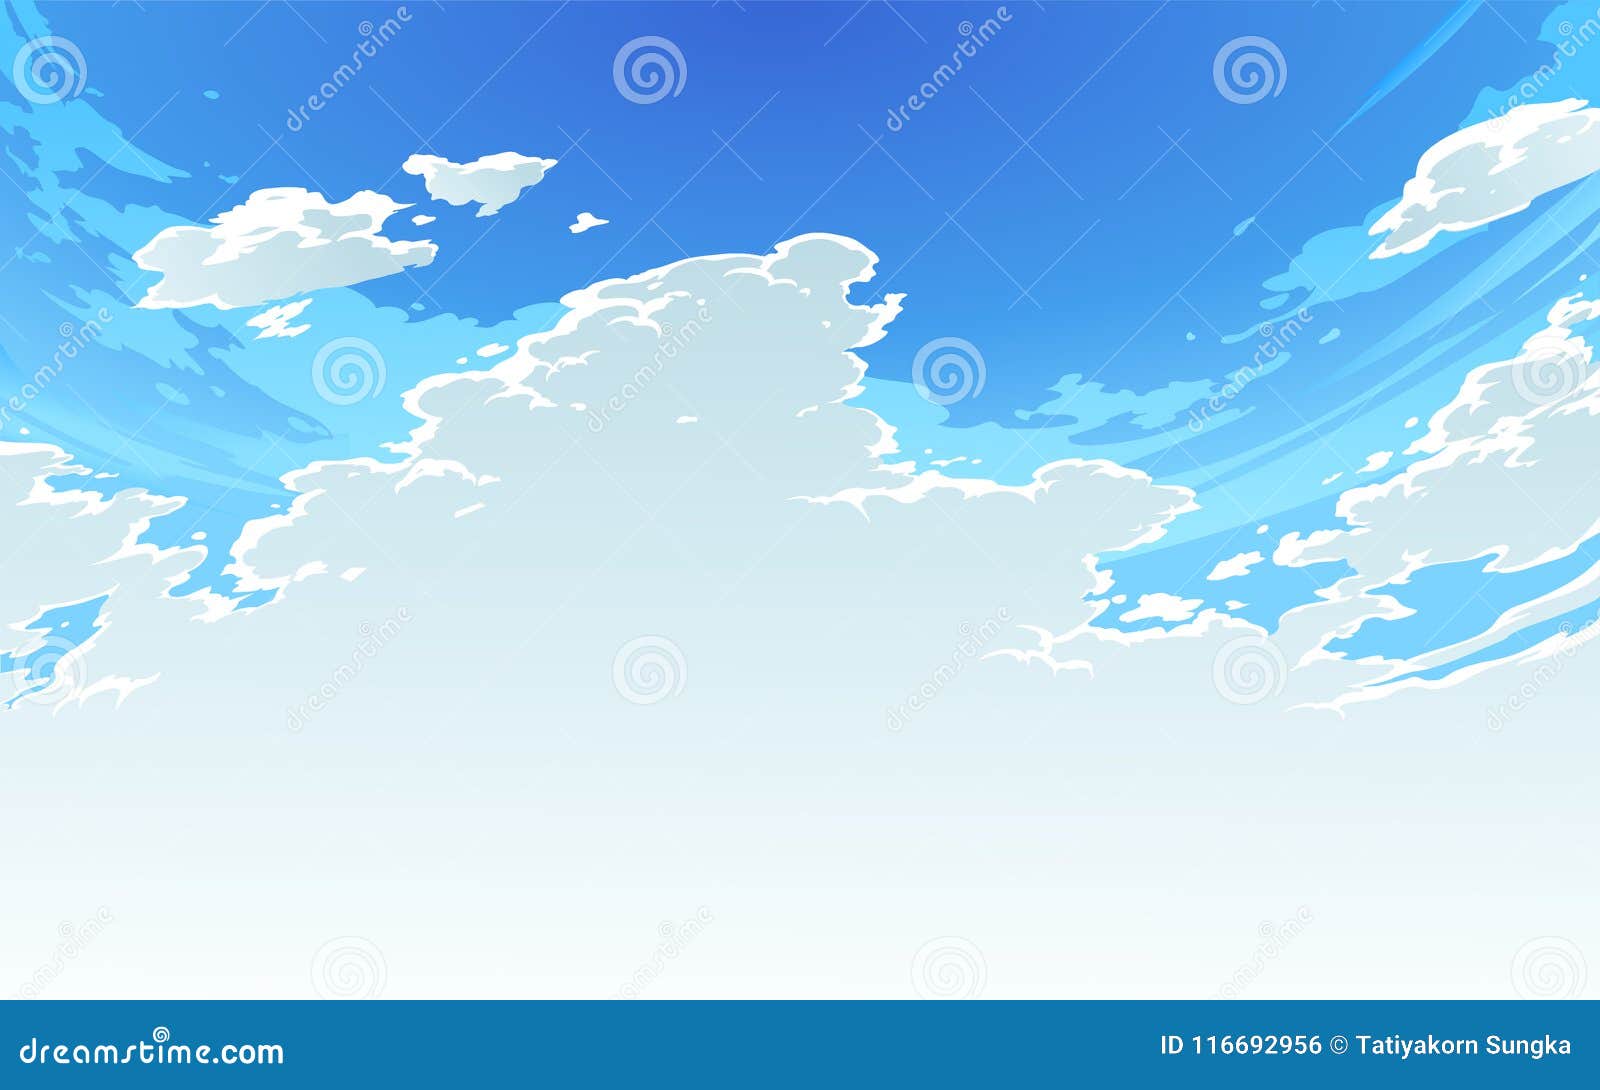 Vector Illustration of Beautiful Bright Cloudy Sky in Anime Style ...